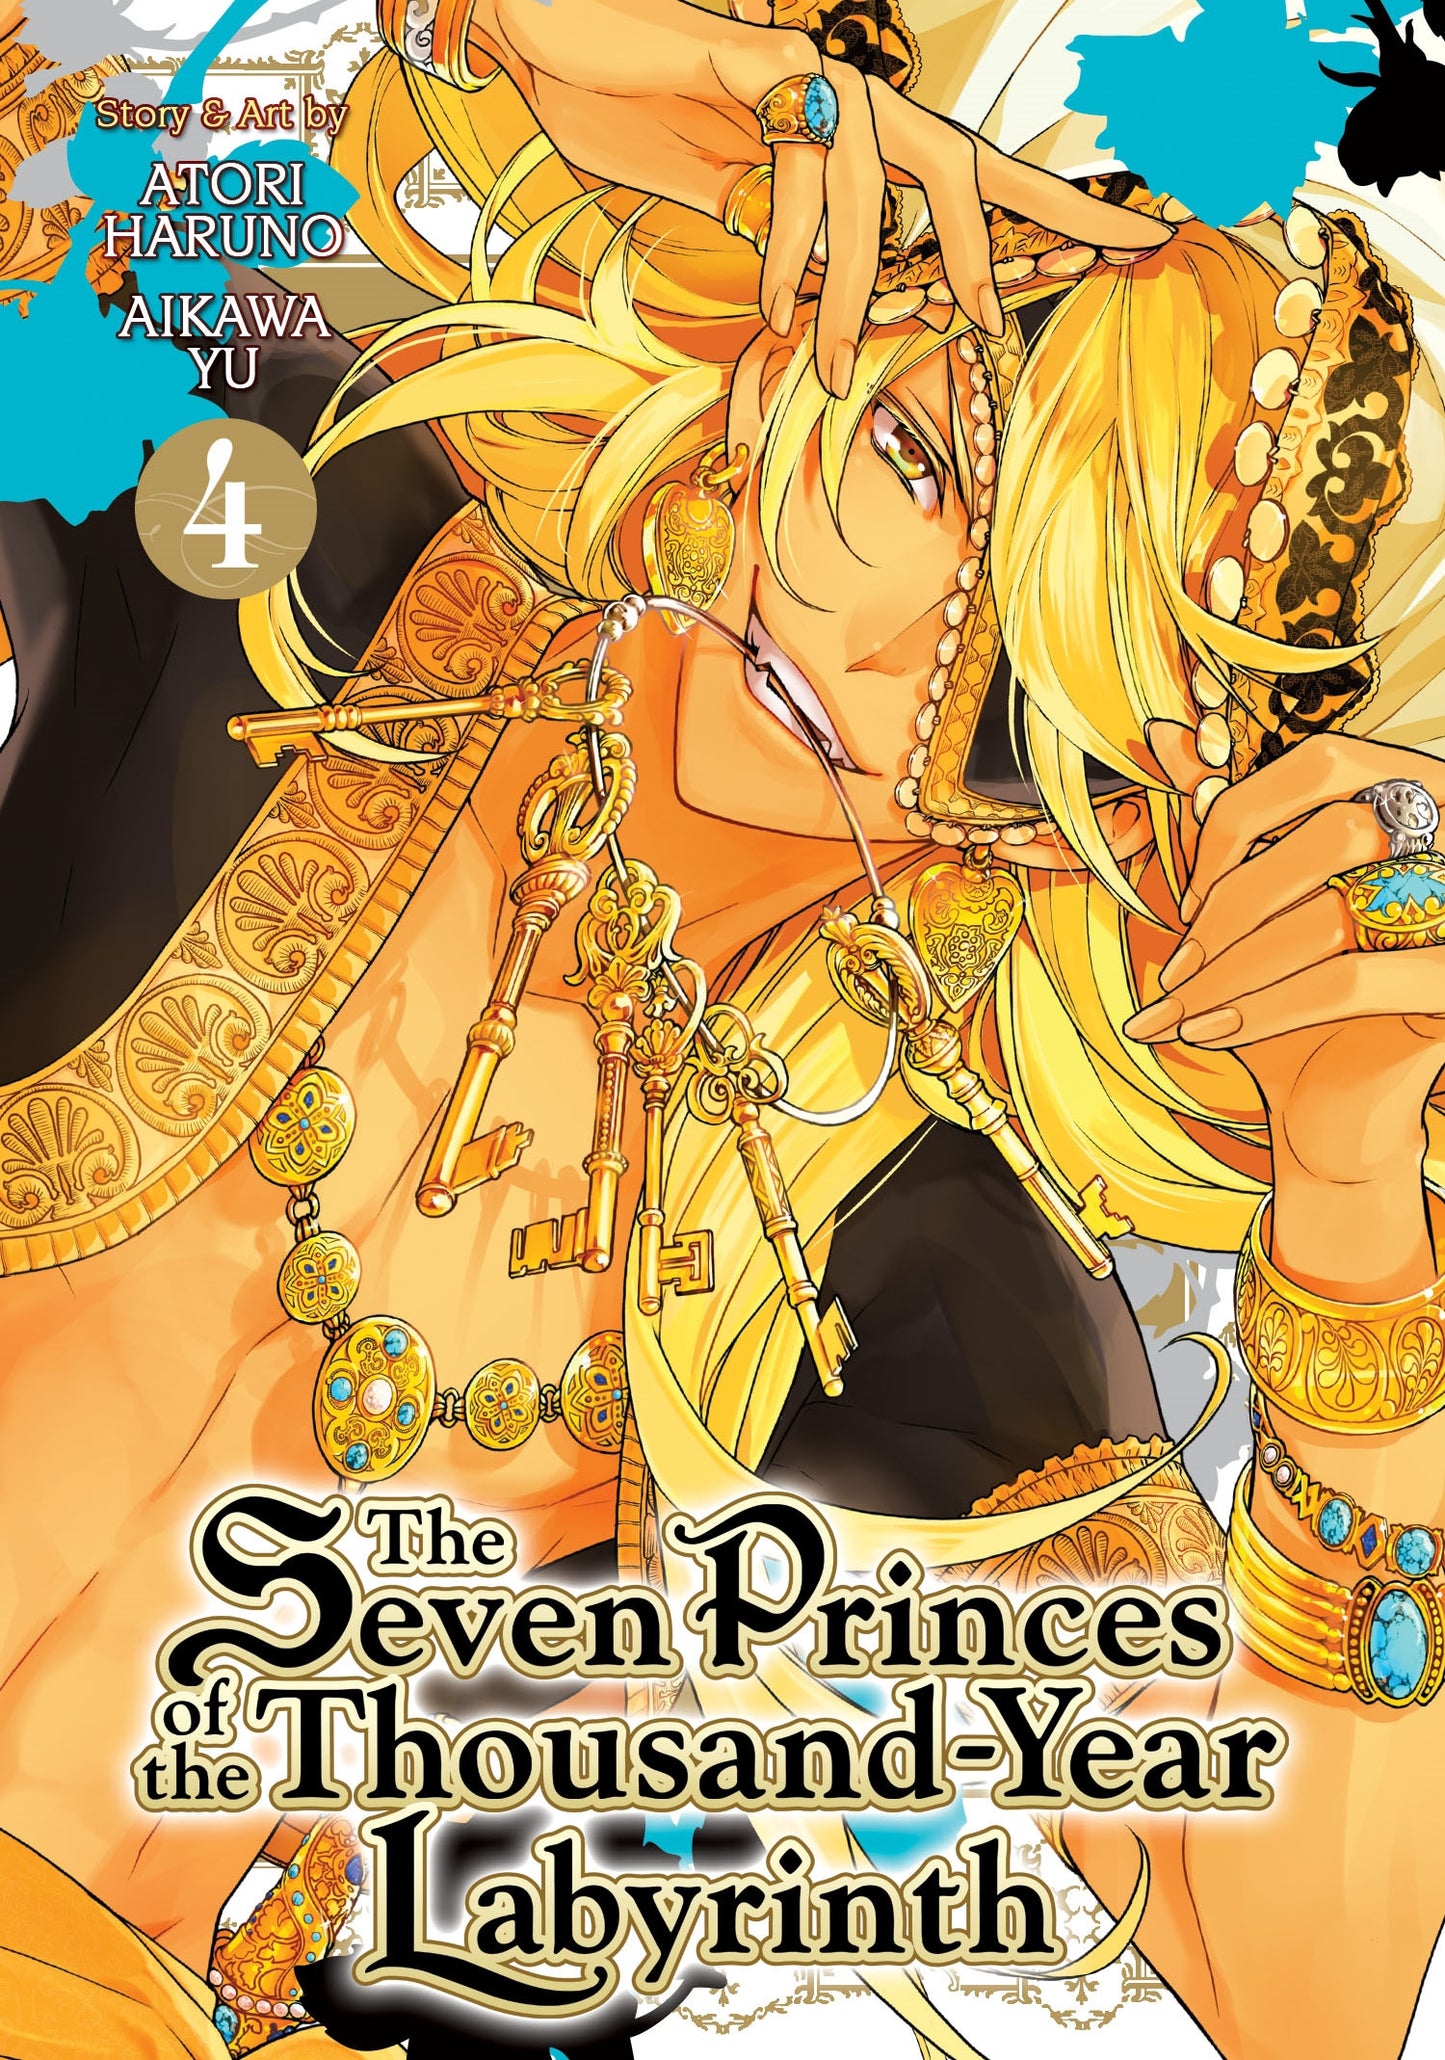 The Seven Princes of the Thousand-Year Labyrinth Vol. 4 - Manga Warehouse